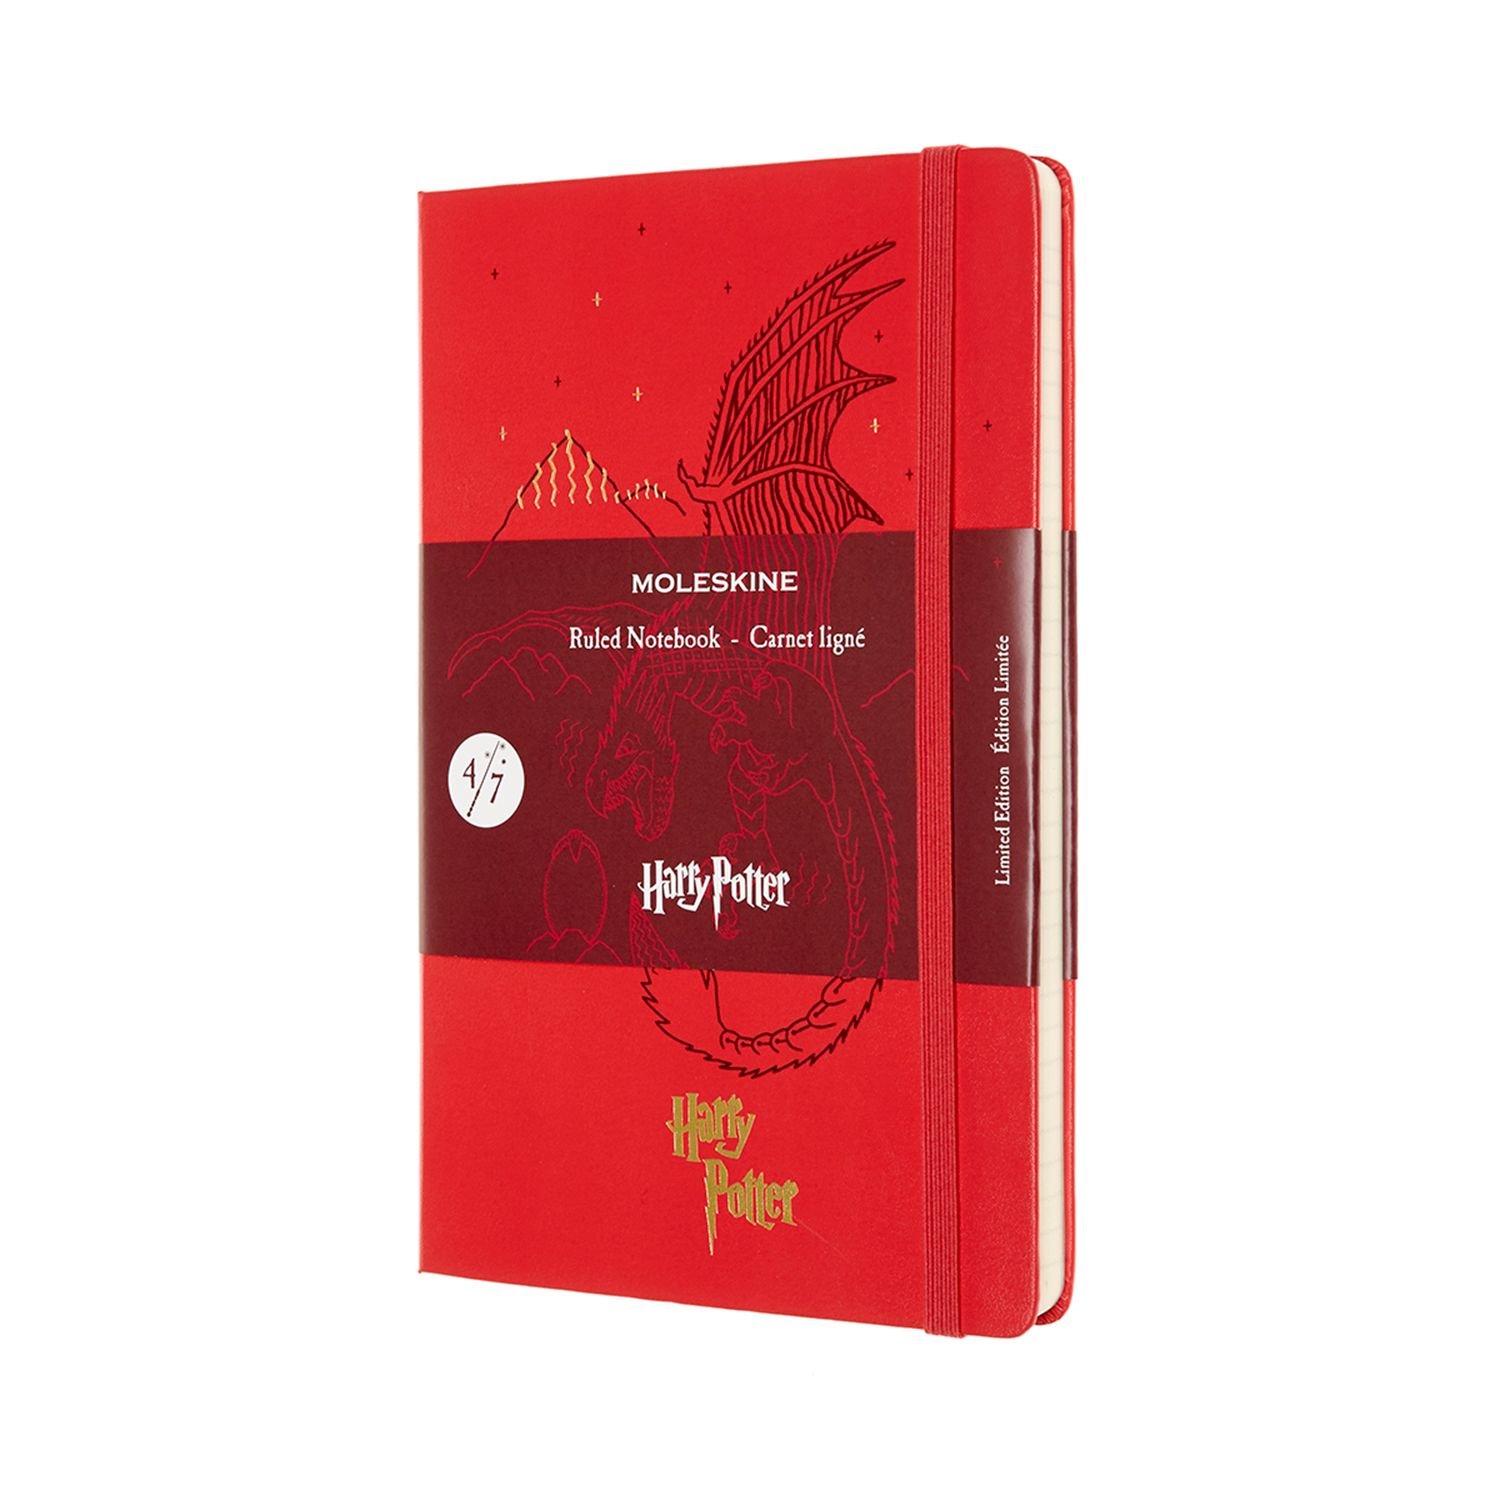 Moleskine Limited Edition Harry Potter Large Ruled Notebook: Book 4 Goblet Of Fire Red